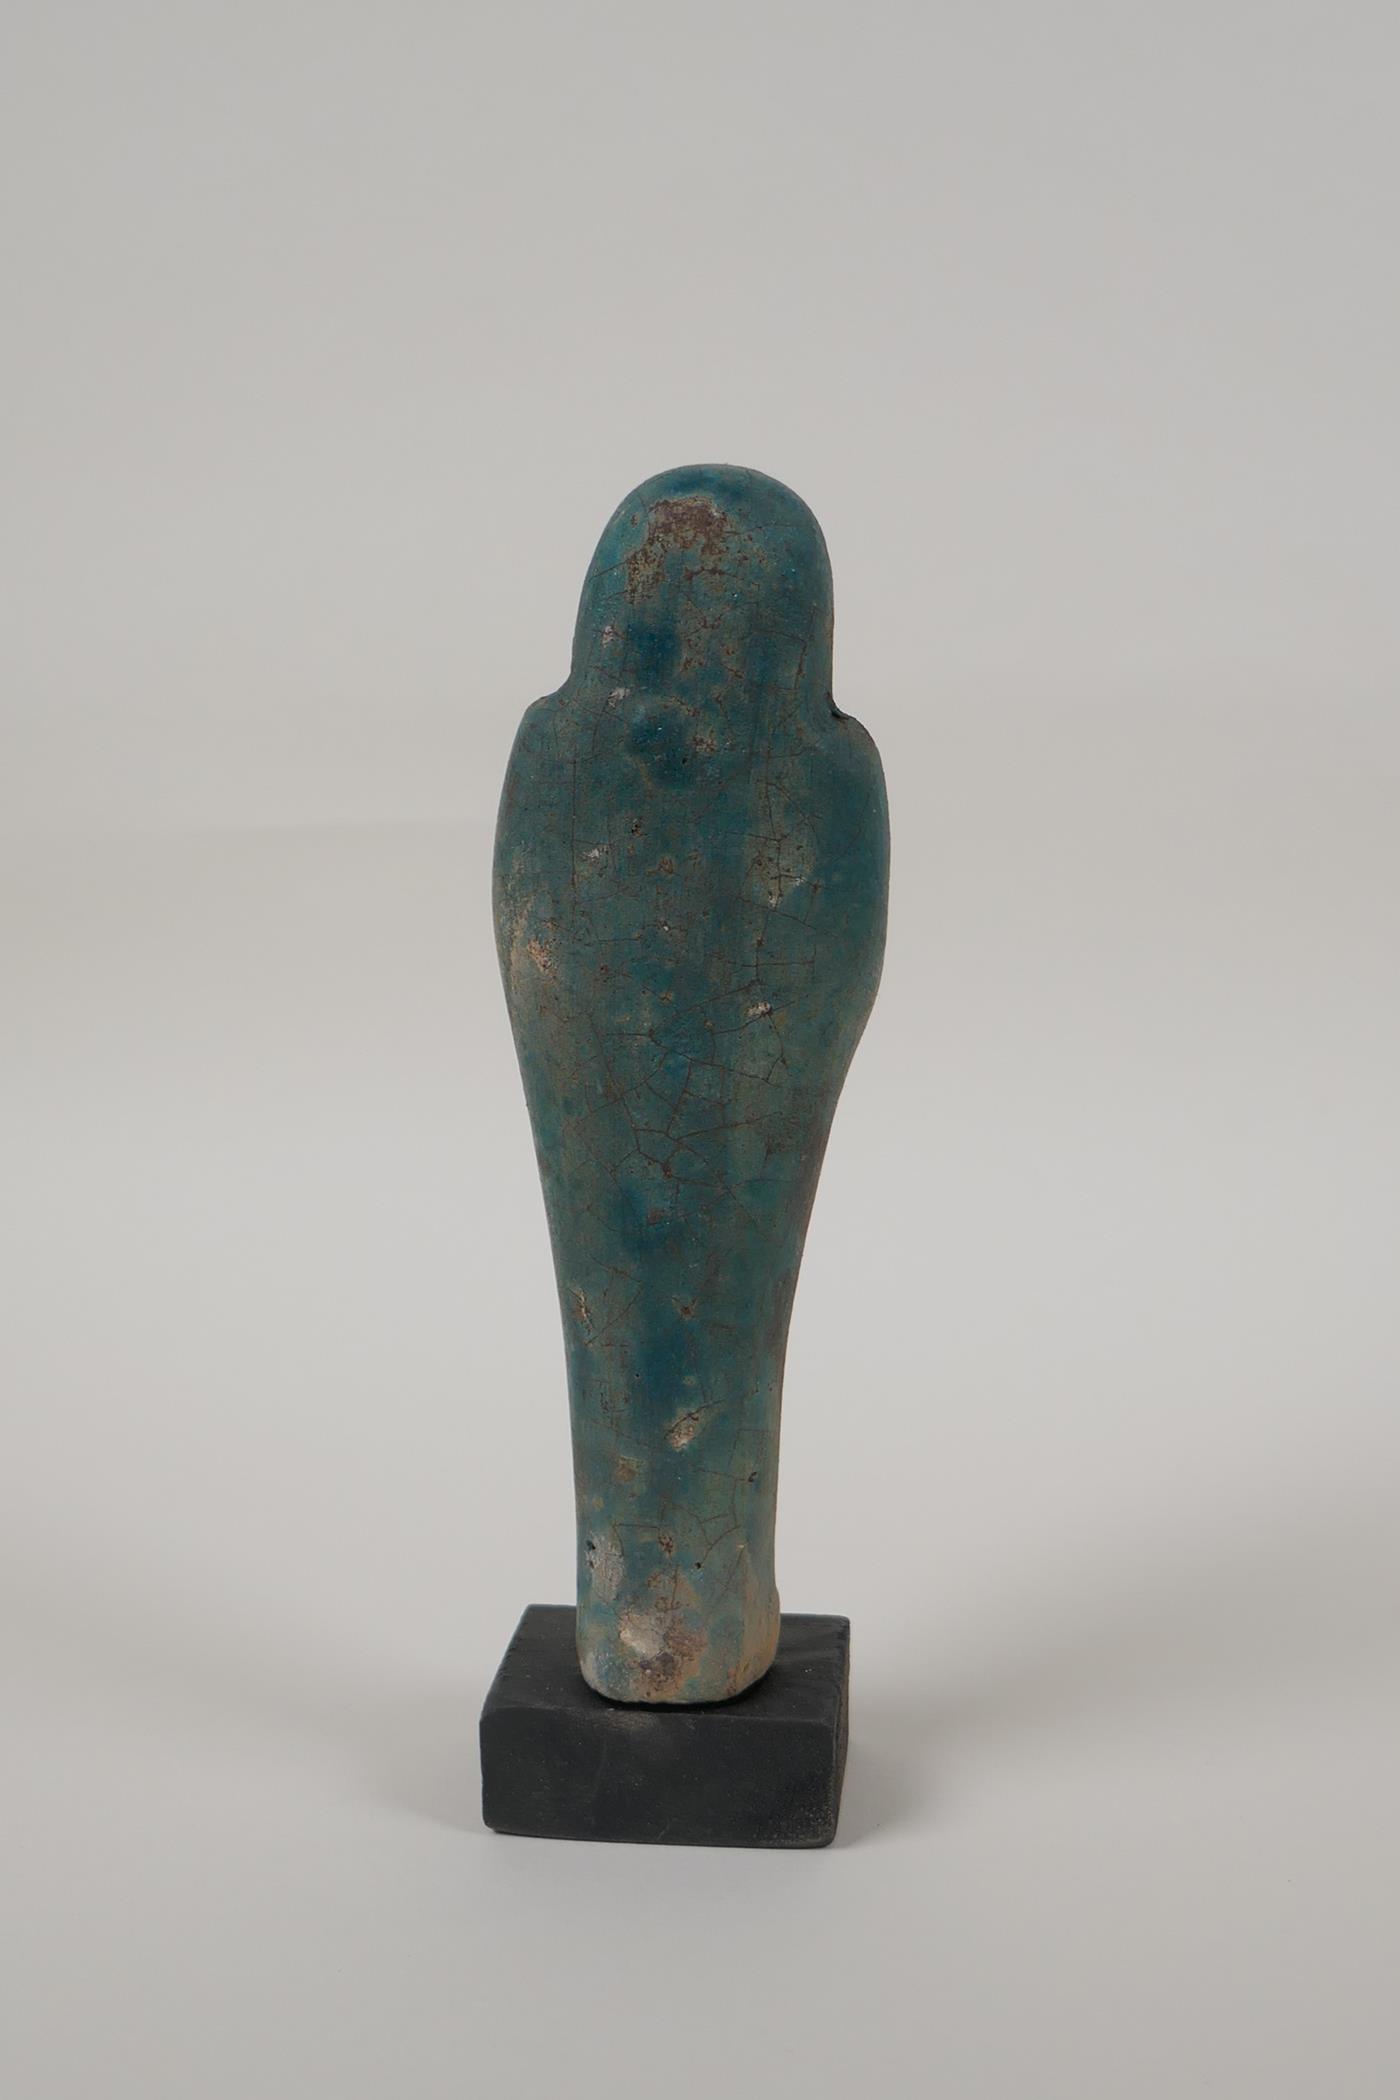 An Egyptian turquoise glazed faience shabti, mounted on a display base, 7" high - Image 4 of 5